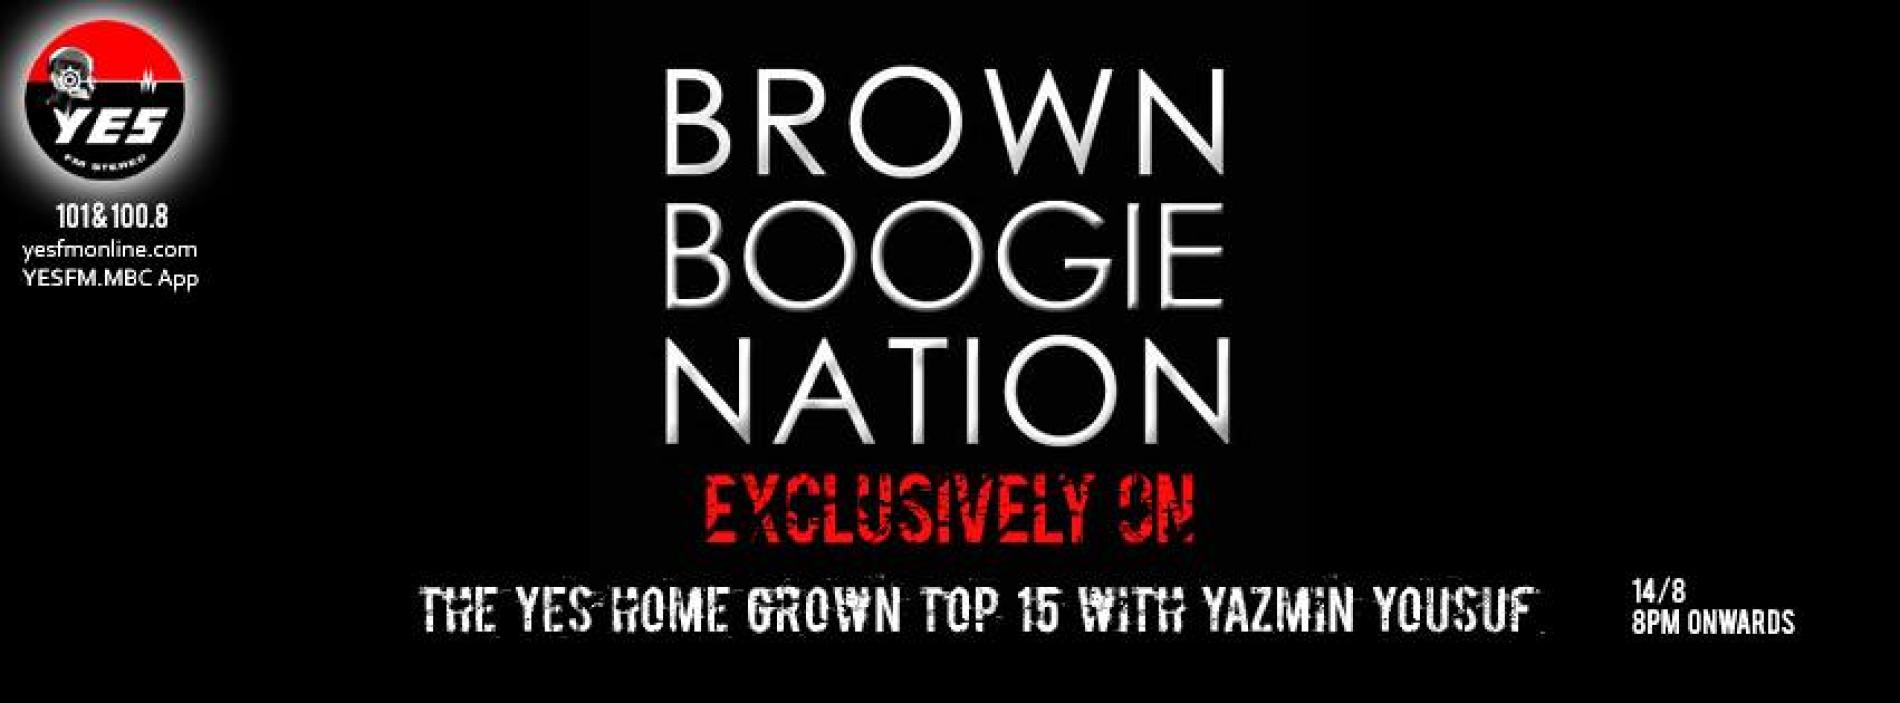 Brown Boogie Nation On The YES Home Grown Top 15